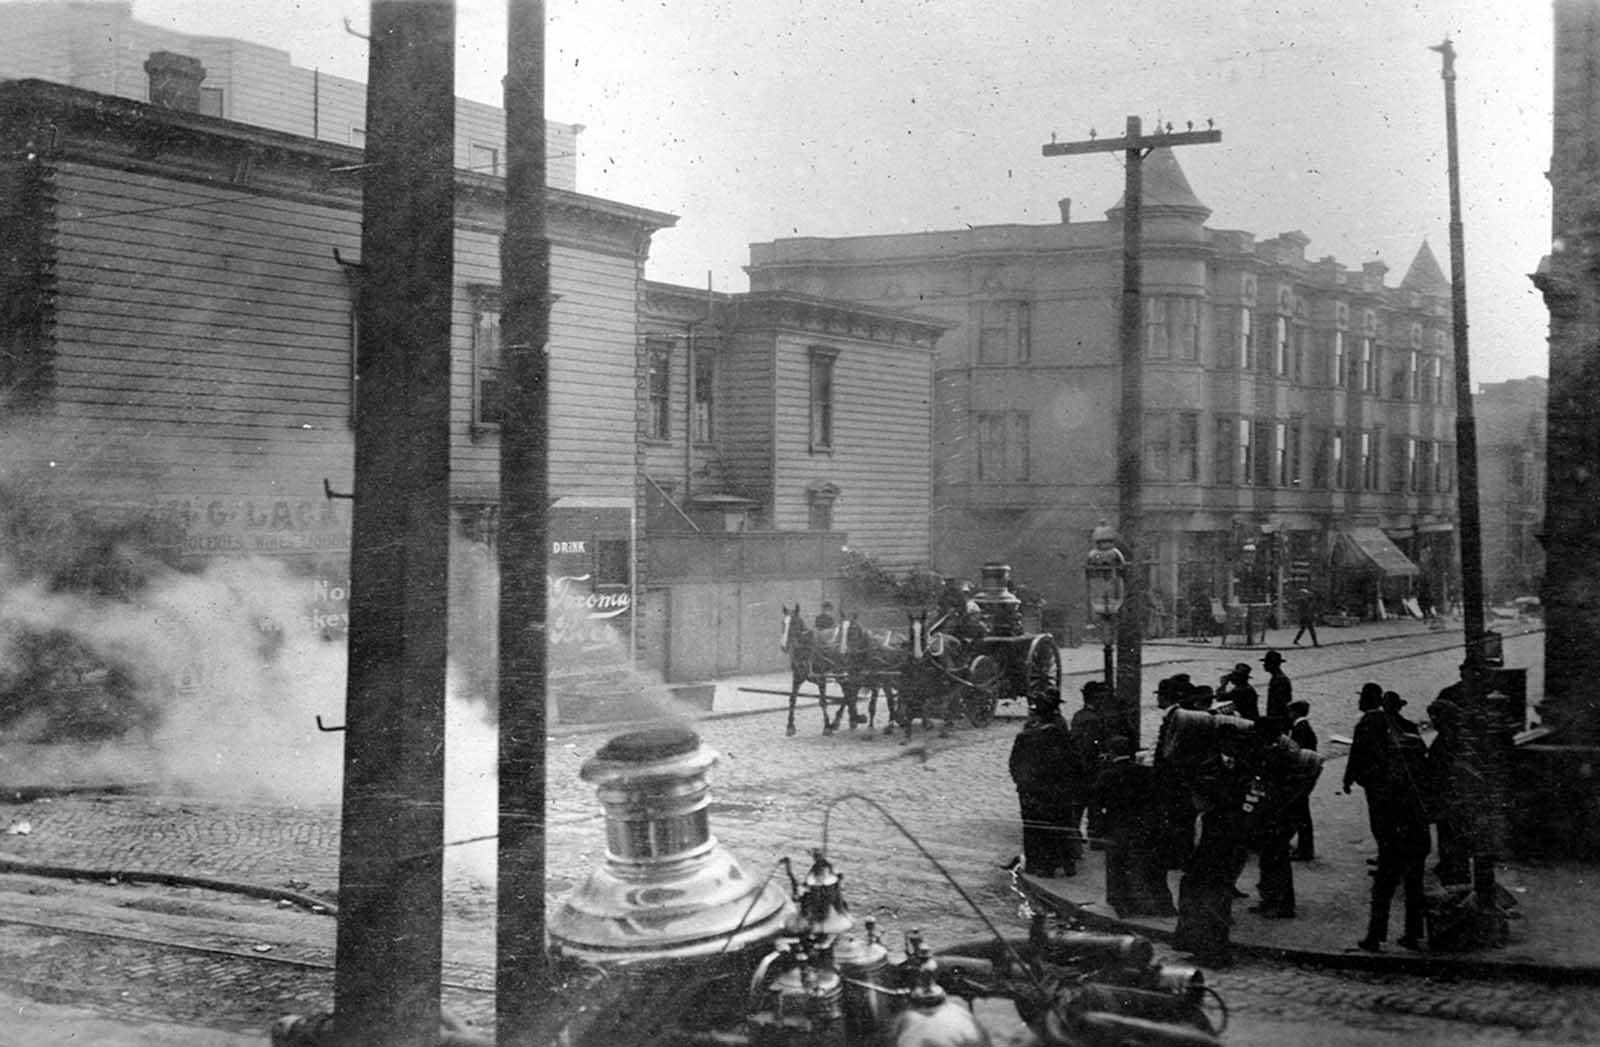 A horse-drawn fire engine retires from a fire to move to a new location on April 19, 1906.